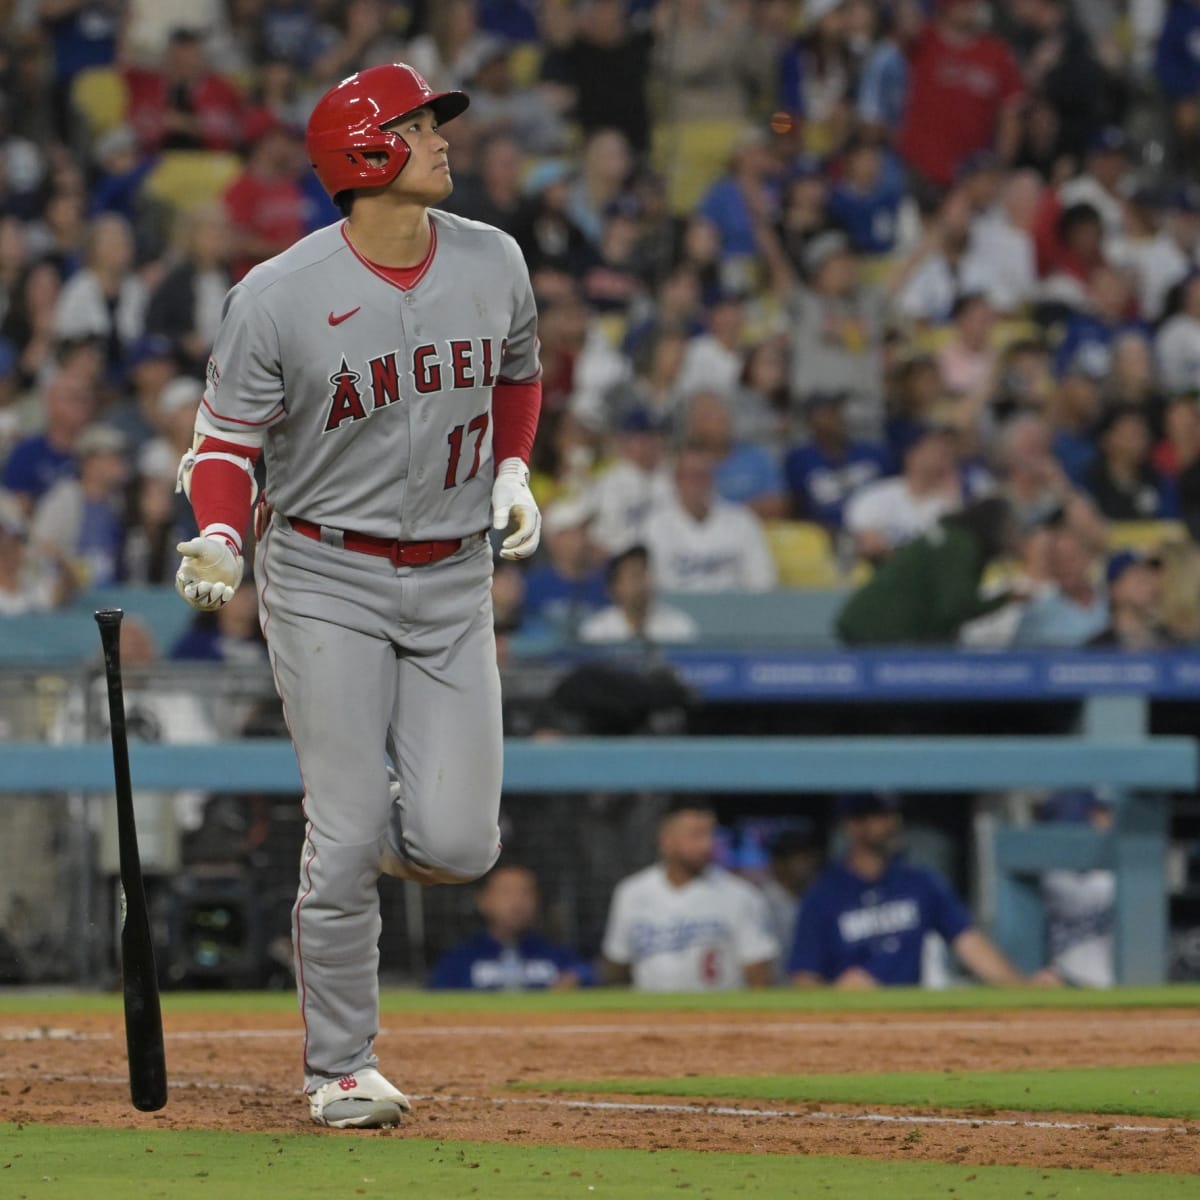 Dodgers after Shohei Ohtani, could offer an exorbitant $500 million deal